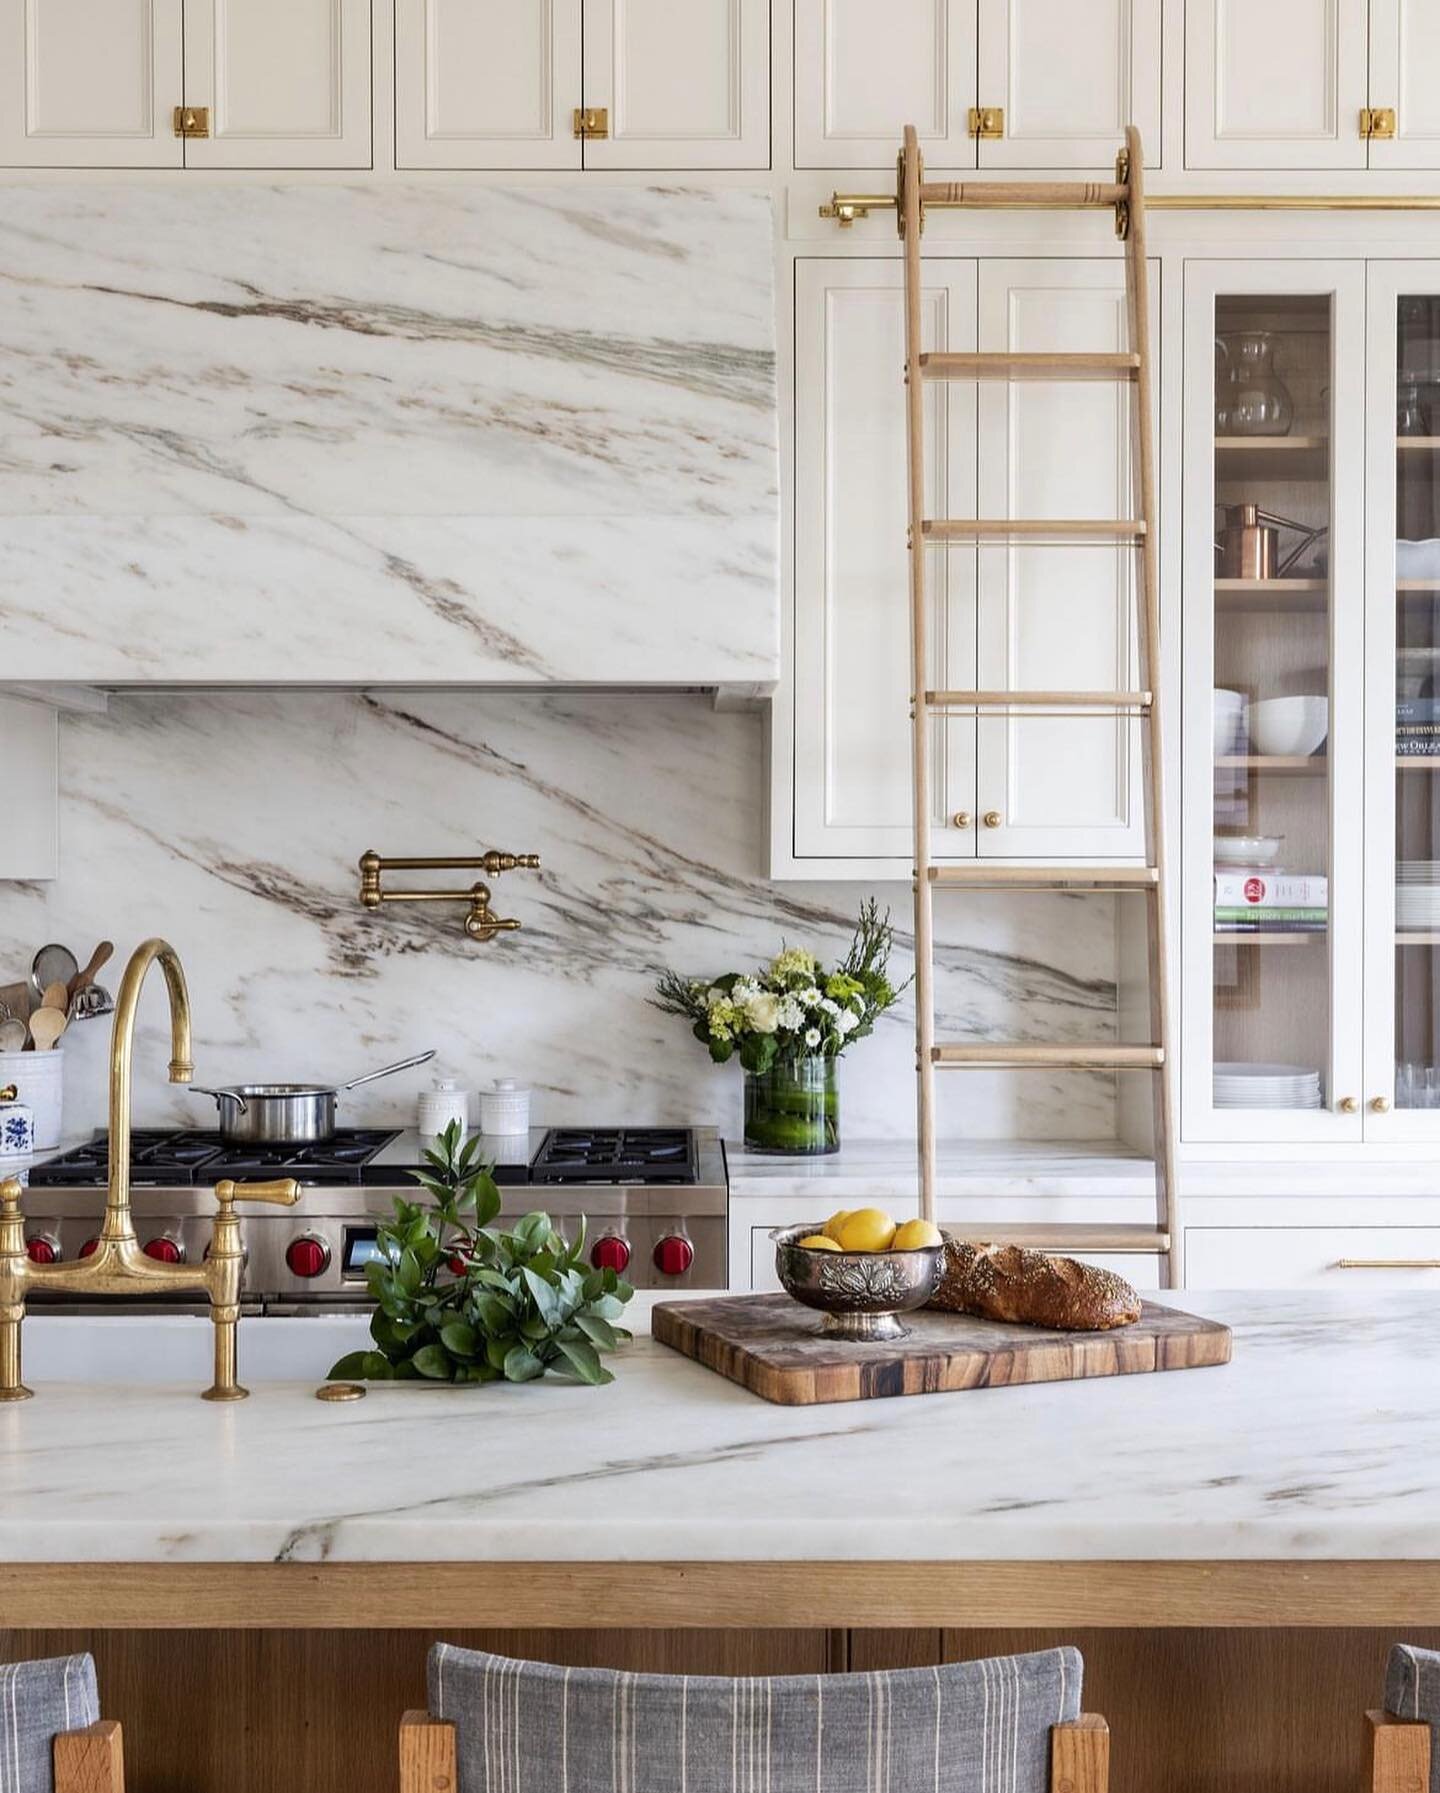 PROJECTS - Sneak peek of the completed kitchen at our State Street project! Full gut down to the studs with an addition and now all the details! Showstopper of a marble clad hood, slab backsplash, unlacquered brass hardware, ladder rail, glass front 